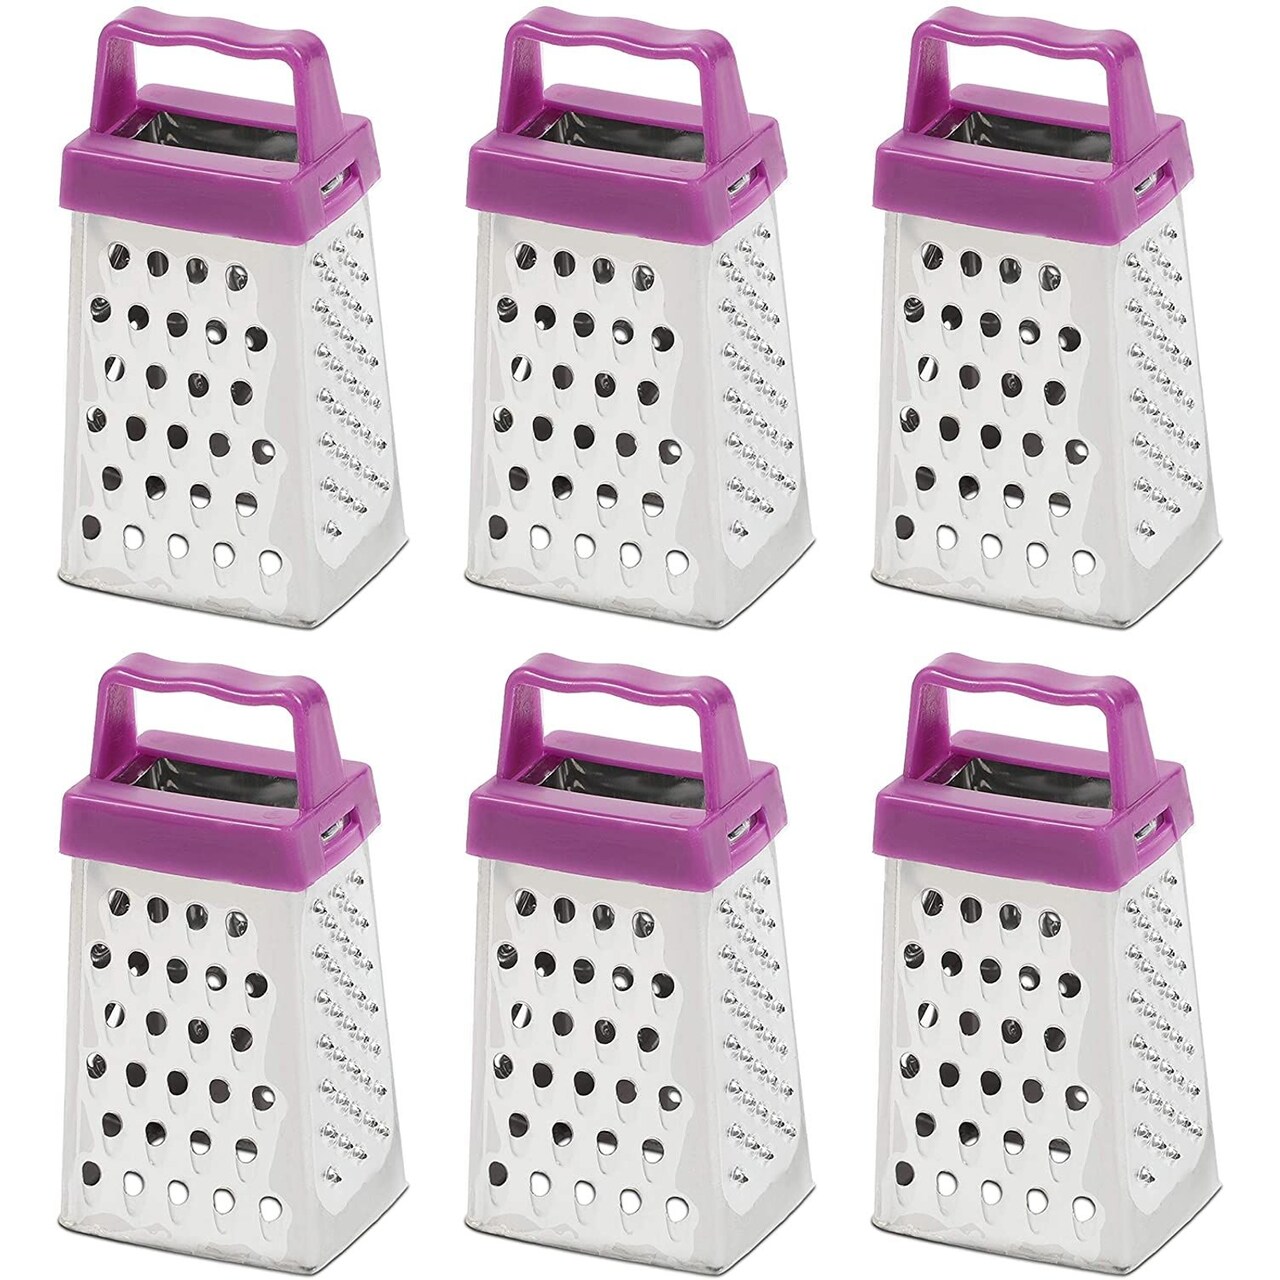 Novelty Mini Stainless Steel Cheese Grater Set (1.5 x 2.9 x 1.15